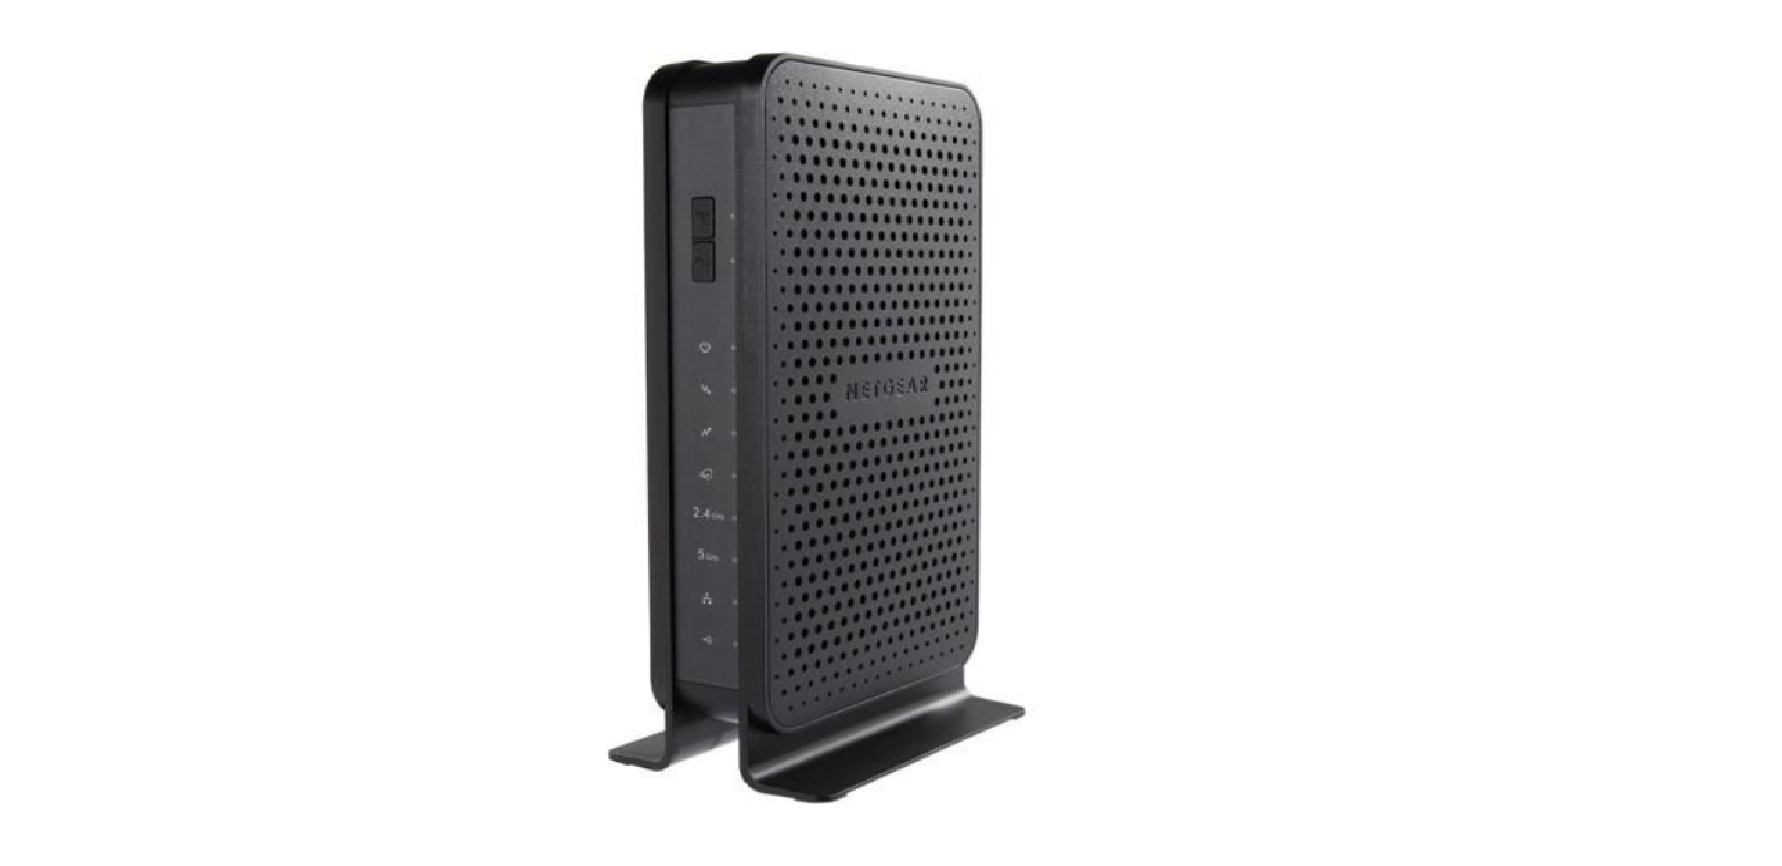 WiFi Cable Modem Router C3700